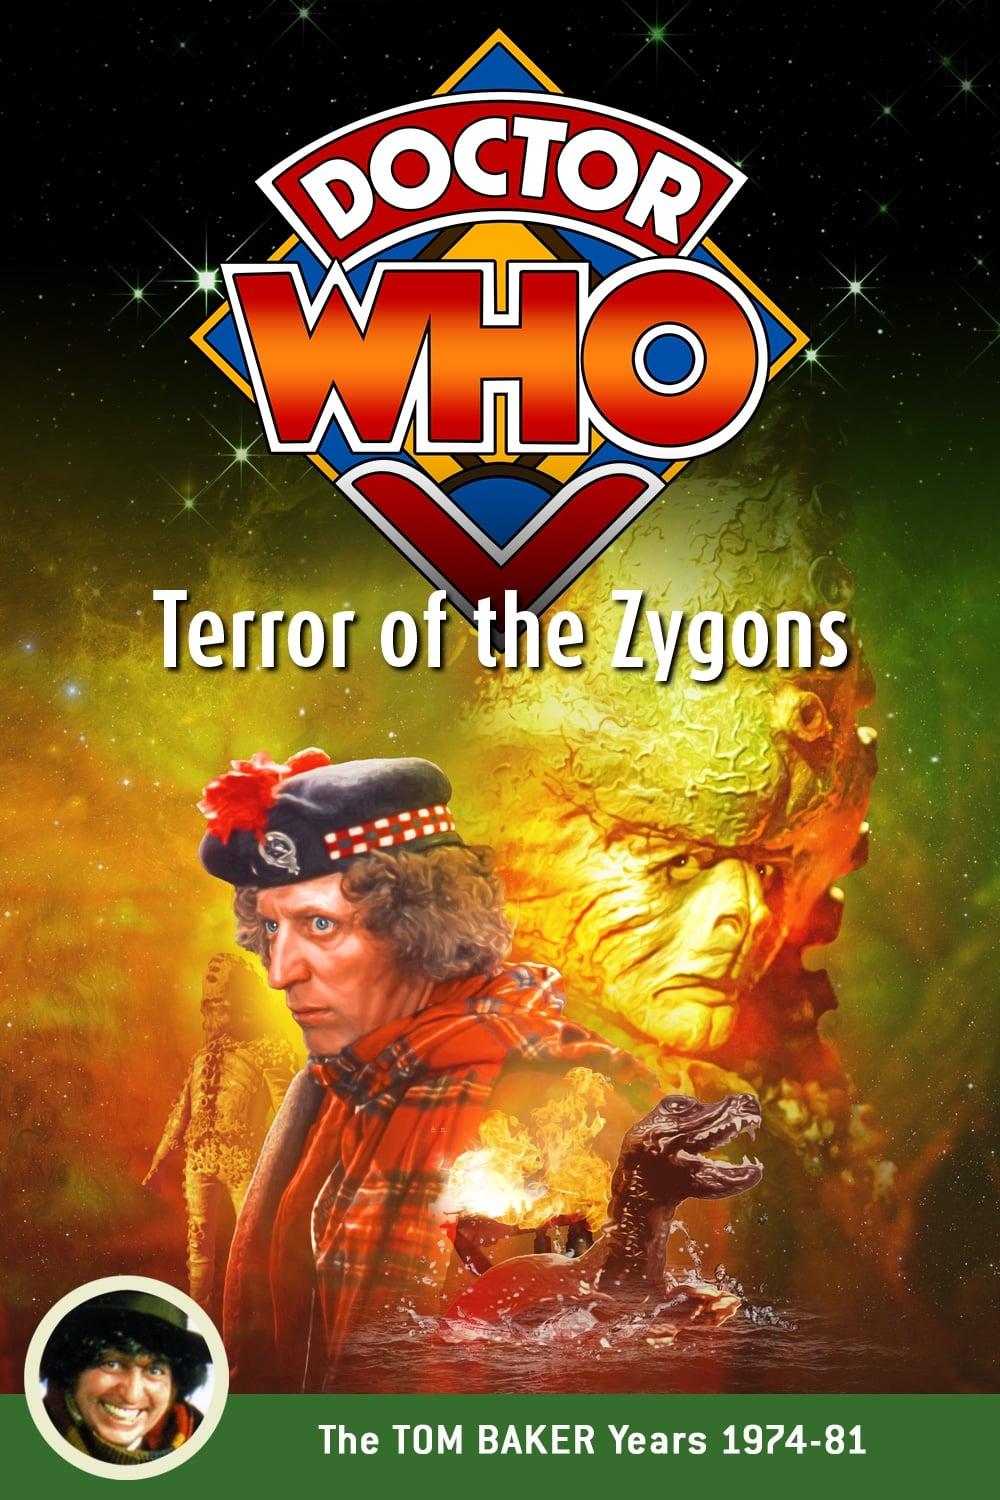 Doctor Who: Terror of the Zygons poster